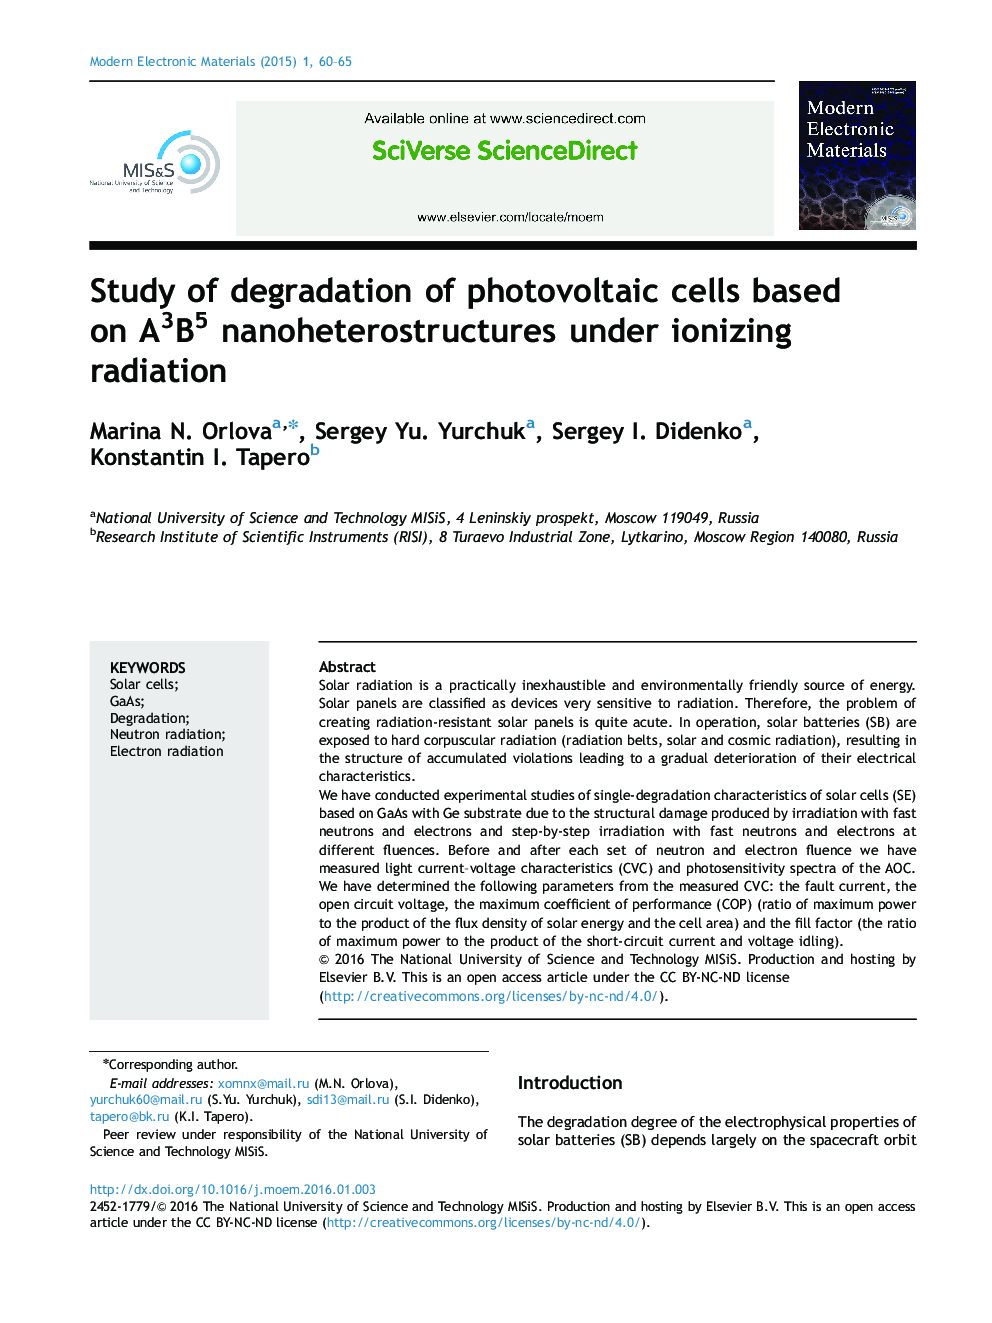 Study of degradation of photovoltaic cells based on A3B5 nanoheterostructures under ionizing radiation